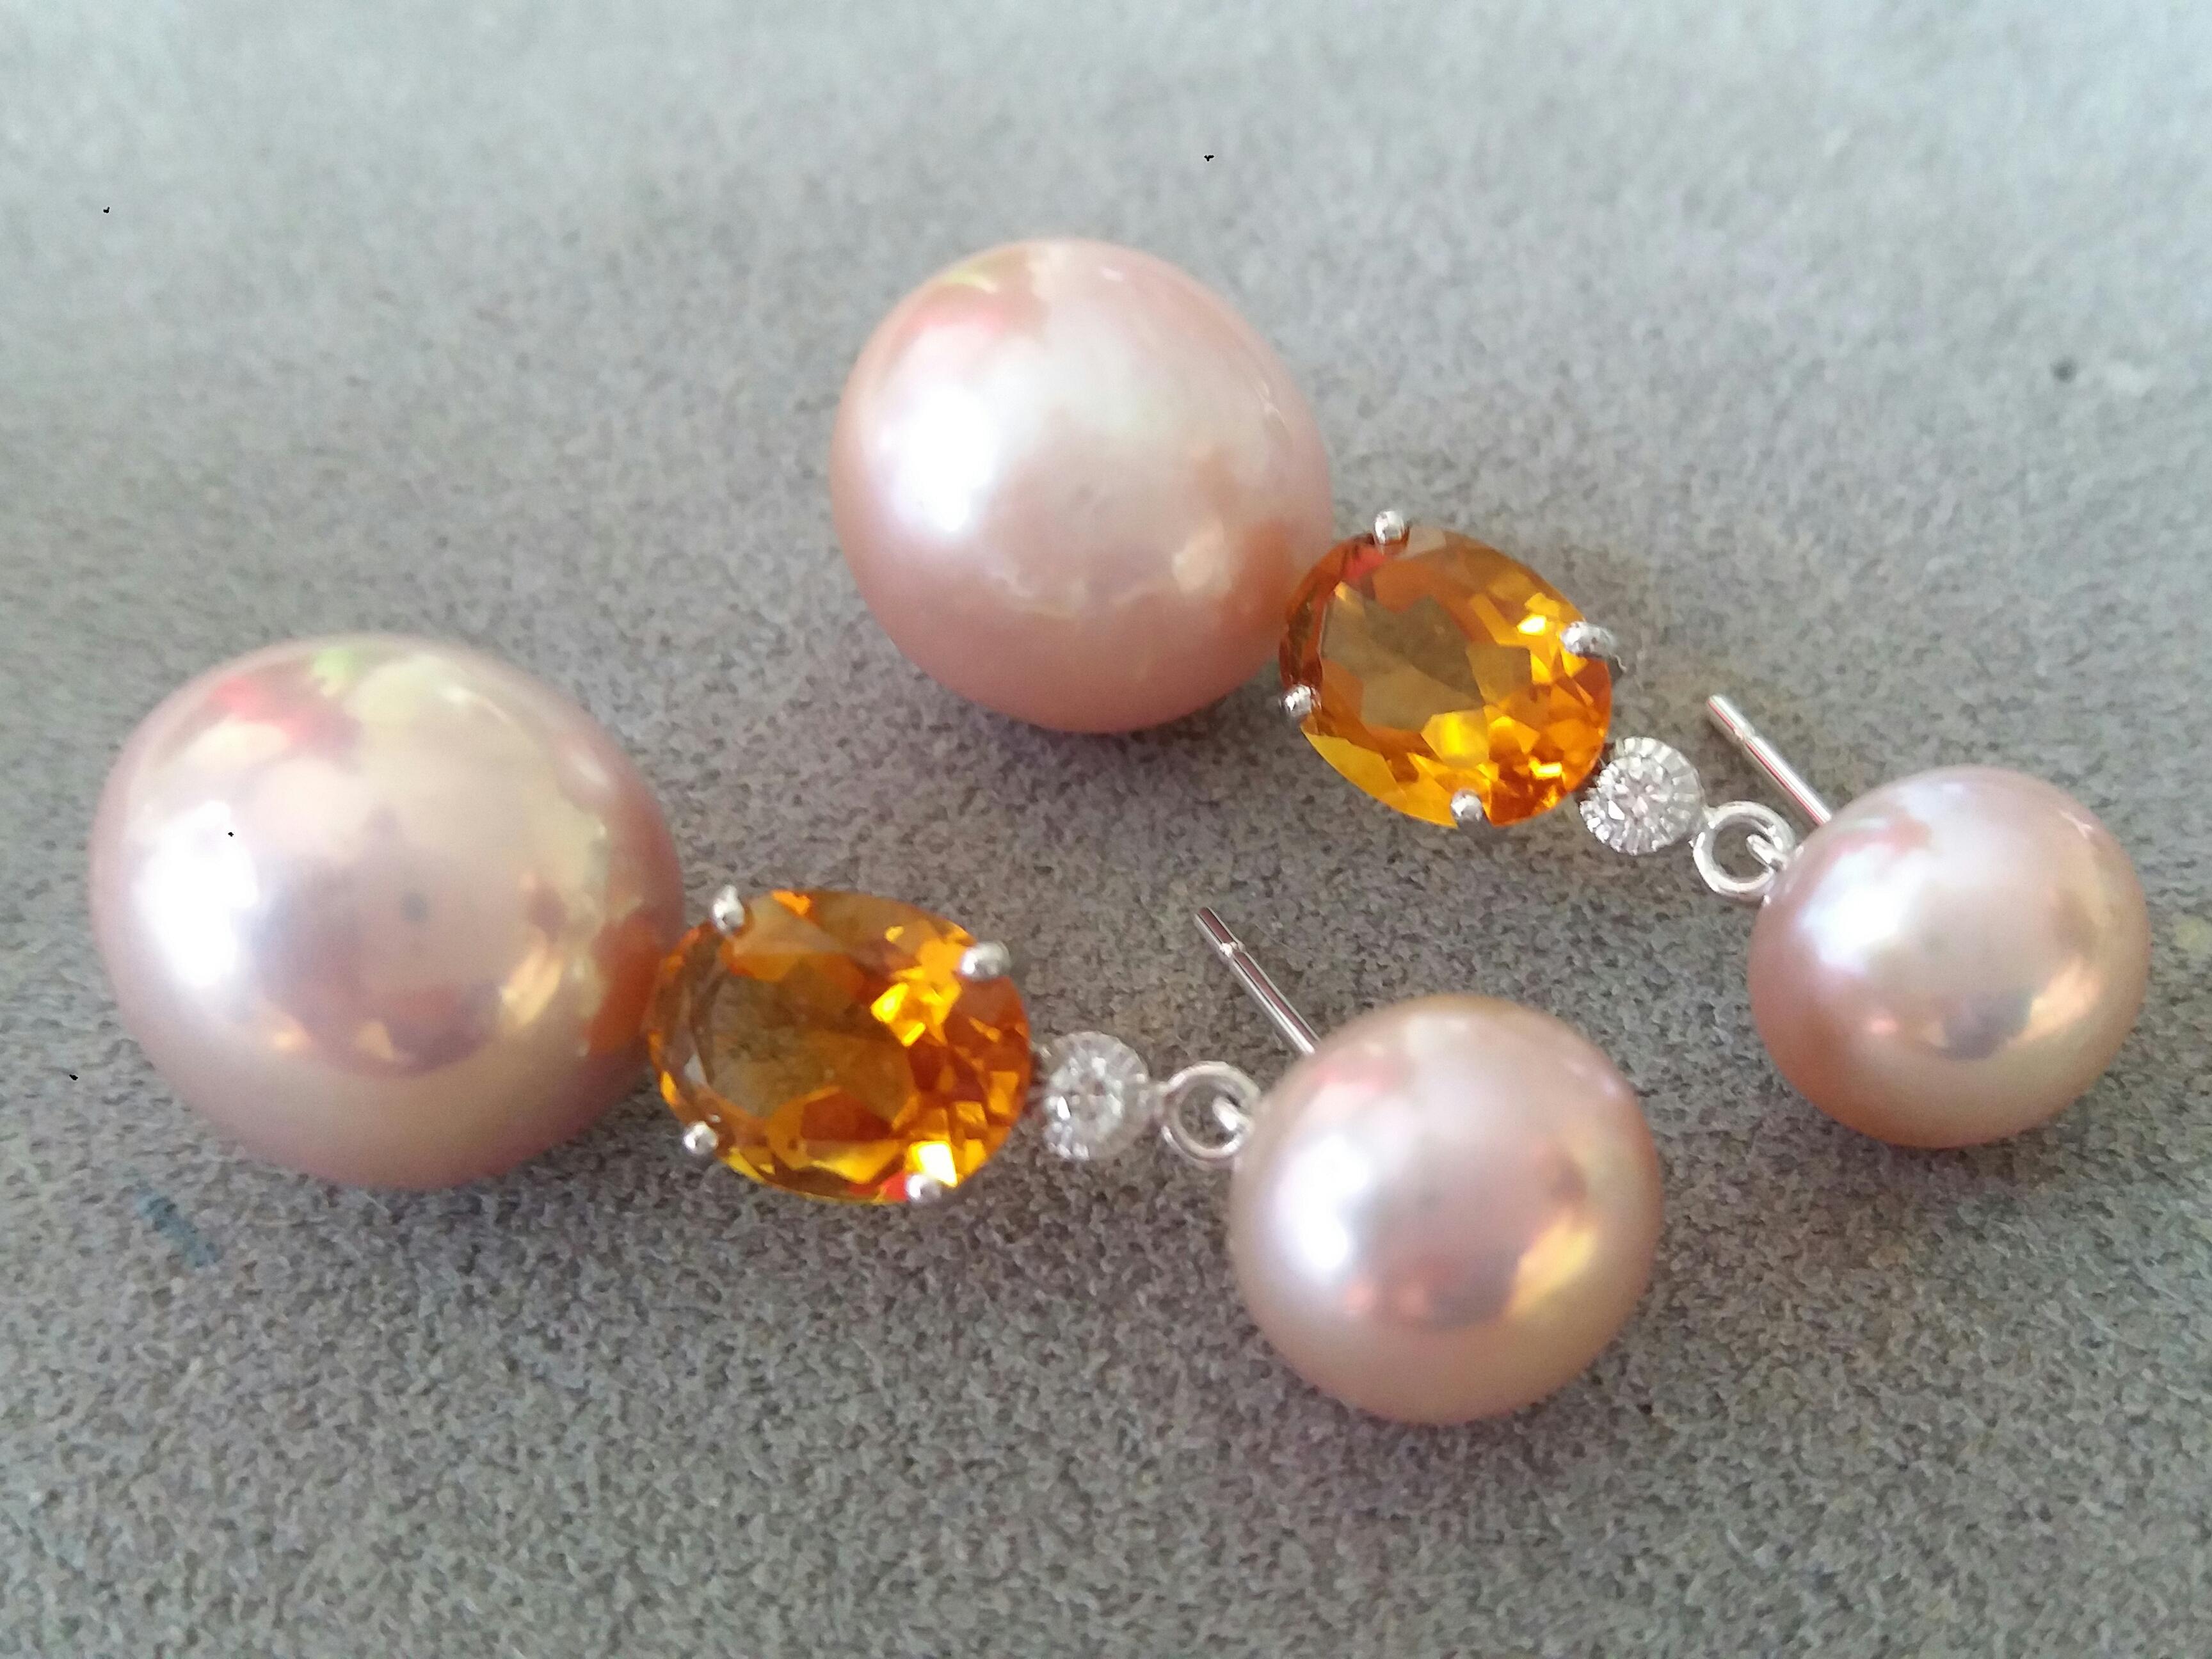 Tops is a pair of natural pinkish color  button shape pearls,the middle parts are in white gold ,2 full cut round diamonds and 2 oval faceted genuine citrine,bottom parts are 2 baroque pinkish pearls around 13 mm in diameter
Length 35
Width  13